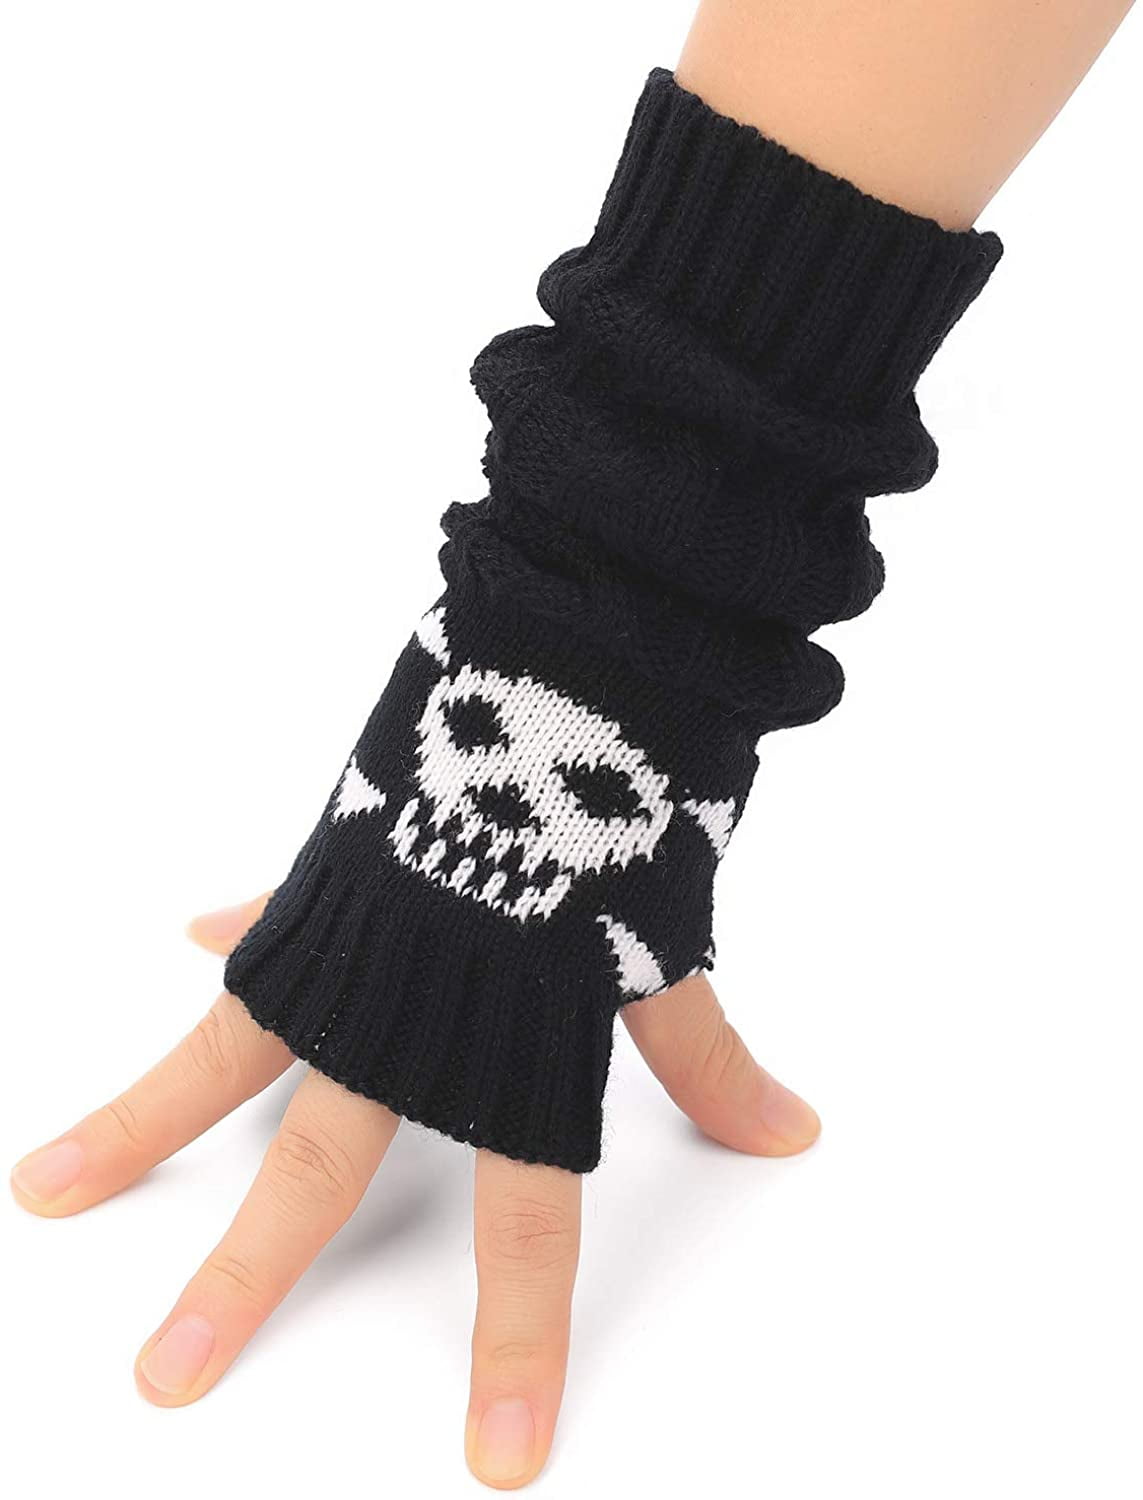 Flammi Womens Cable Knit Arm Warmers Fingerless Gloves Thumb Hole Gloves Mittens 